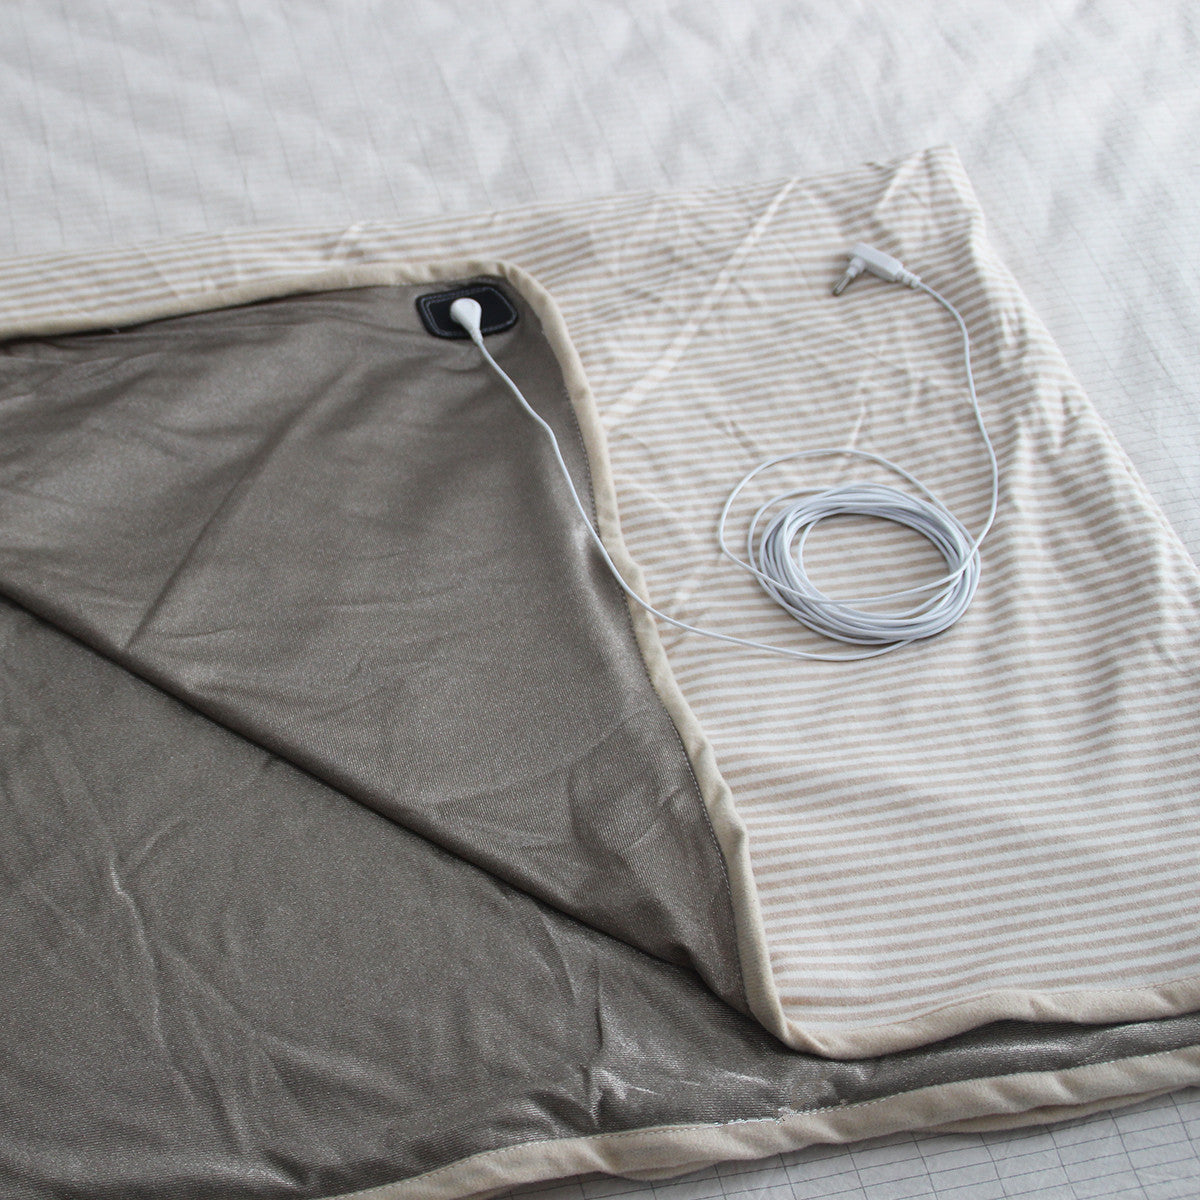 Faraday Protection Blanket Very Large